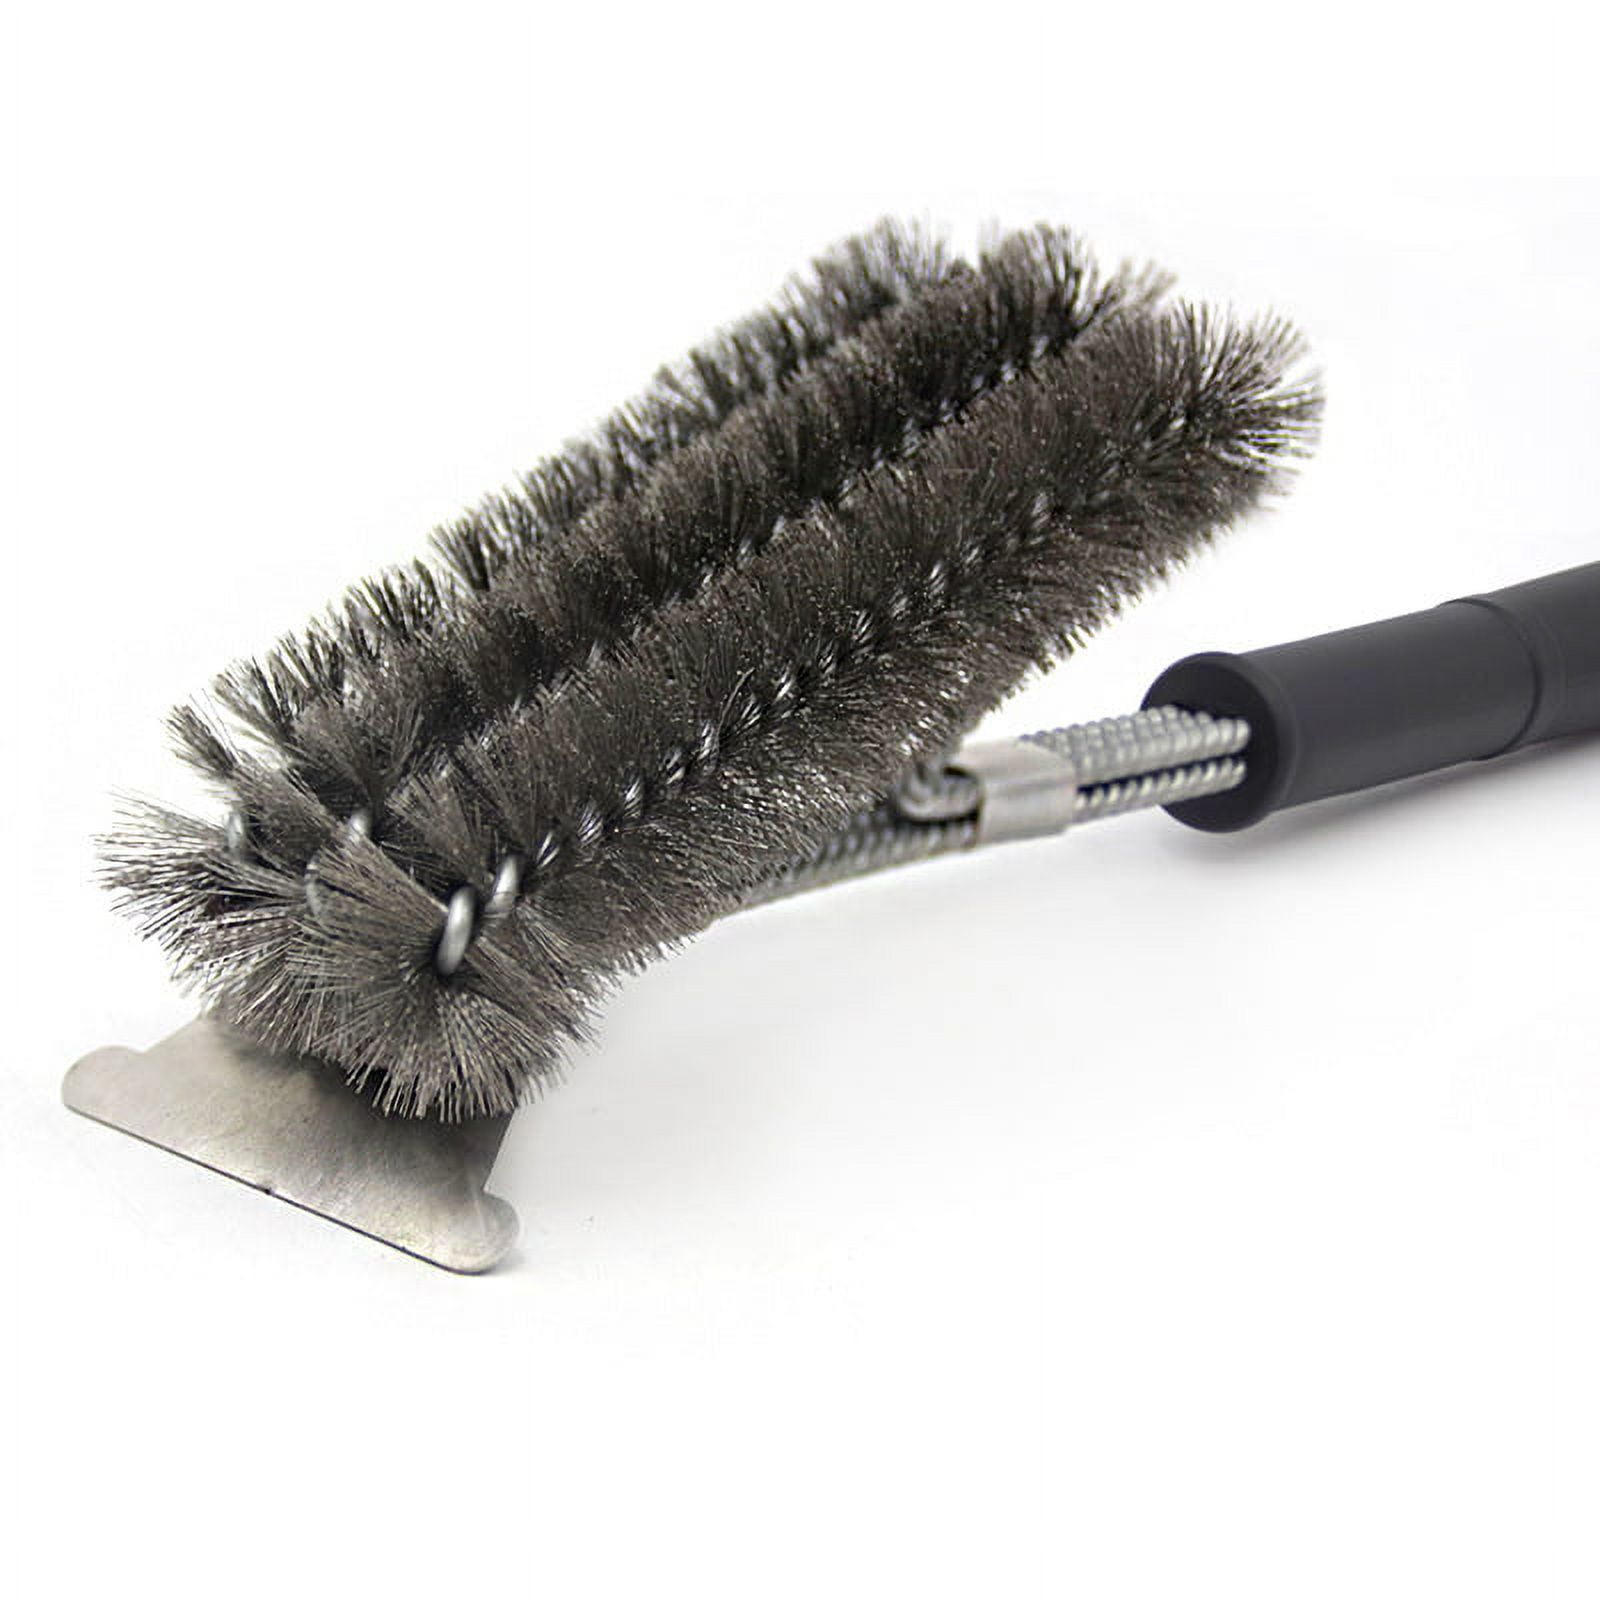 GRILLUMAID Grill Brush Bristle Free, Safe BBQ Brush Cleaner and Scraper for Outdoor Grill, 18” Stainless Grill Grate Scrubber, Cleaning Brushes for